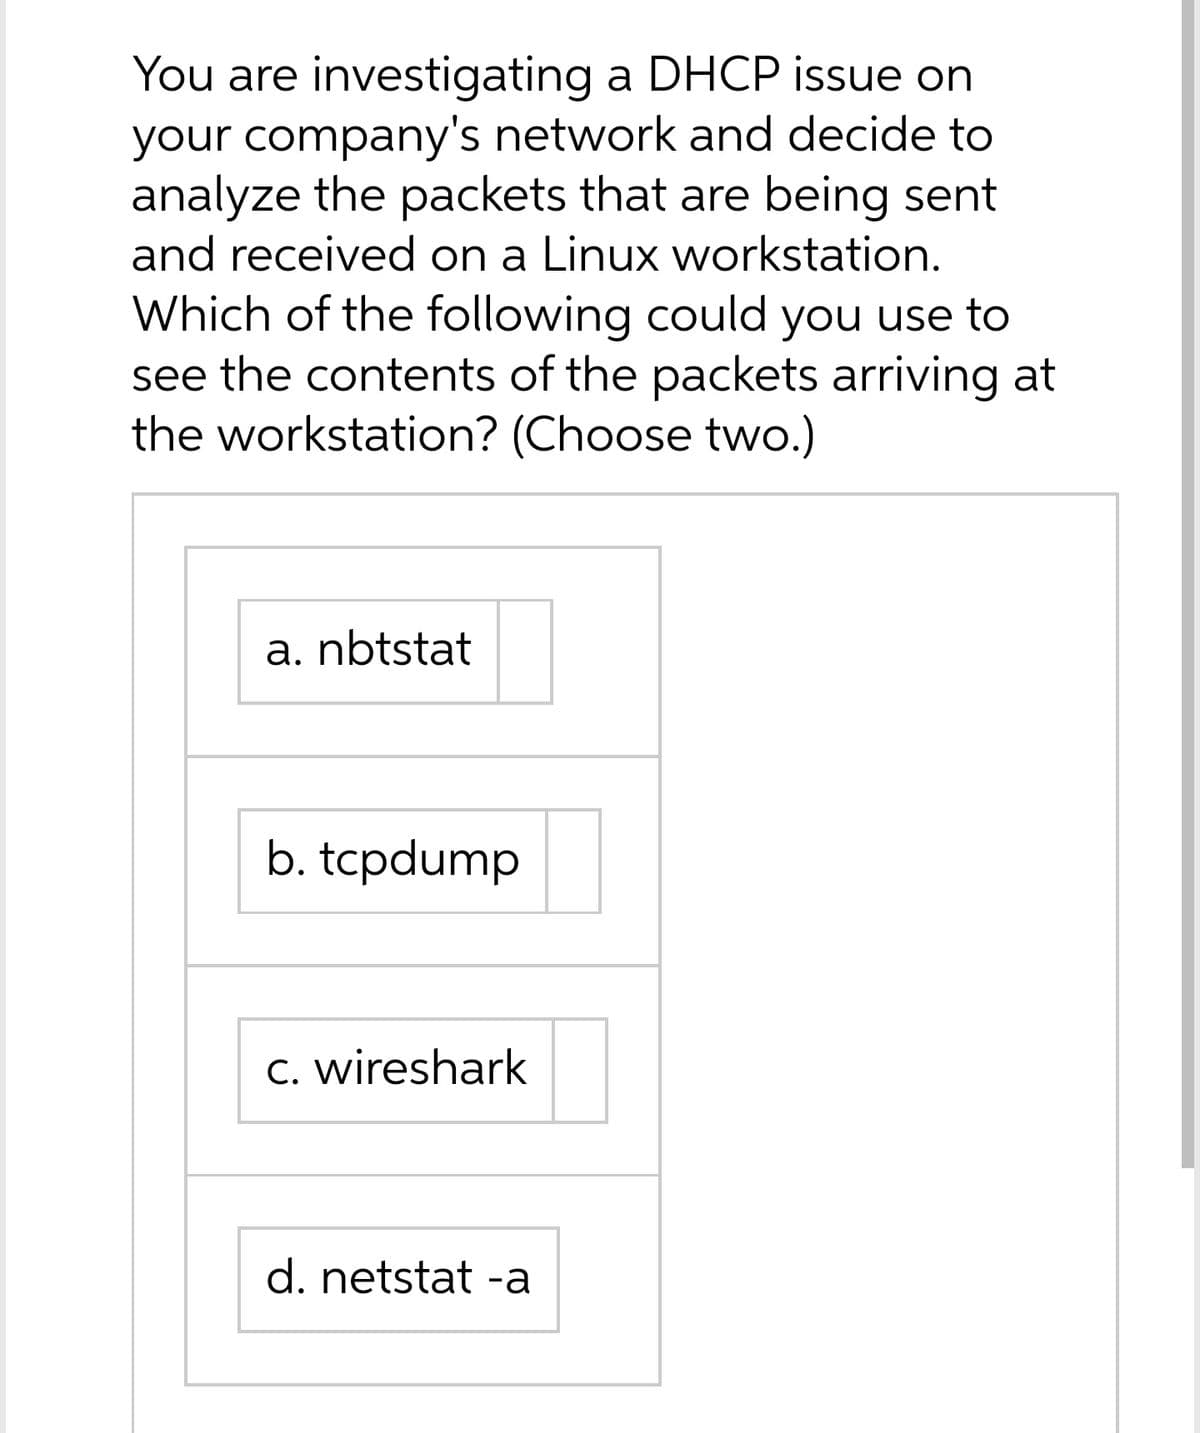 You are investigating a DHCP issue on
your company's network and decide to
analyze the packets that are being sent
and received on a Linux workstation.
Which of the following could you use to
see the contents of the packets arriving at
the workstation? (Choose two.)
a. nbtstat
b. tcpdump
C. wireshark
d. netstat -a
